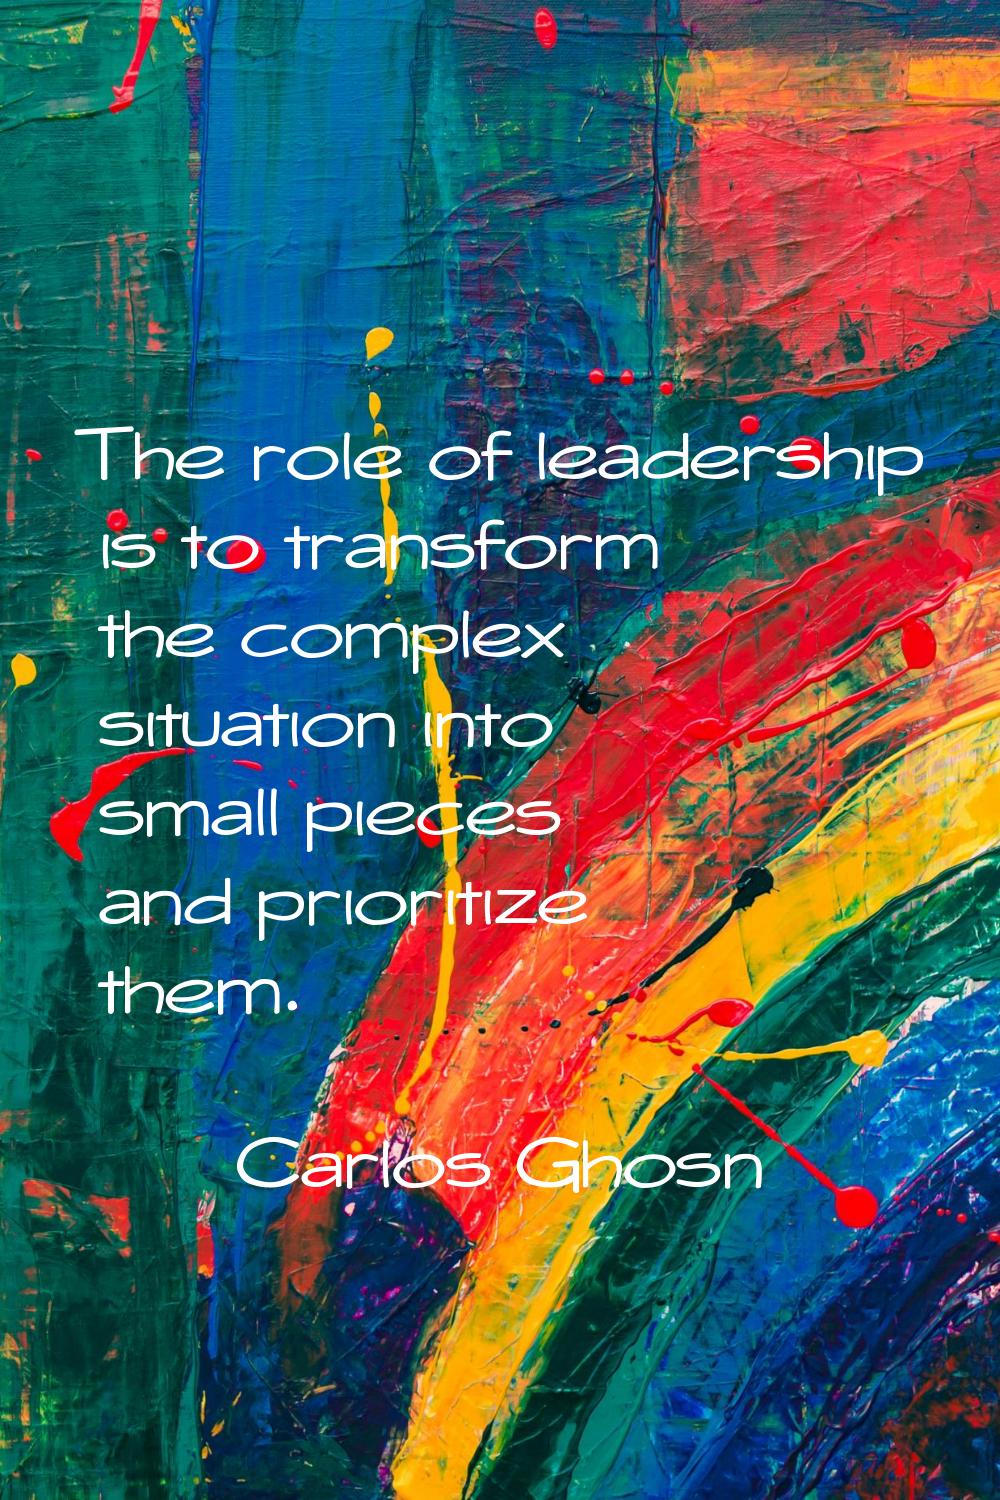 The role of leadership is to transform the complex situation into small pieces and prioritize them.